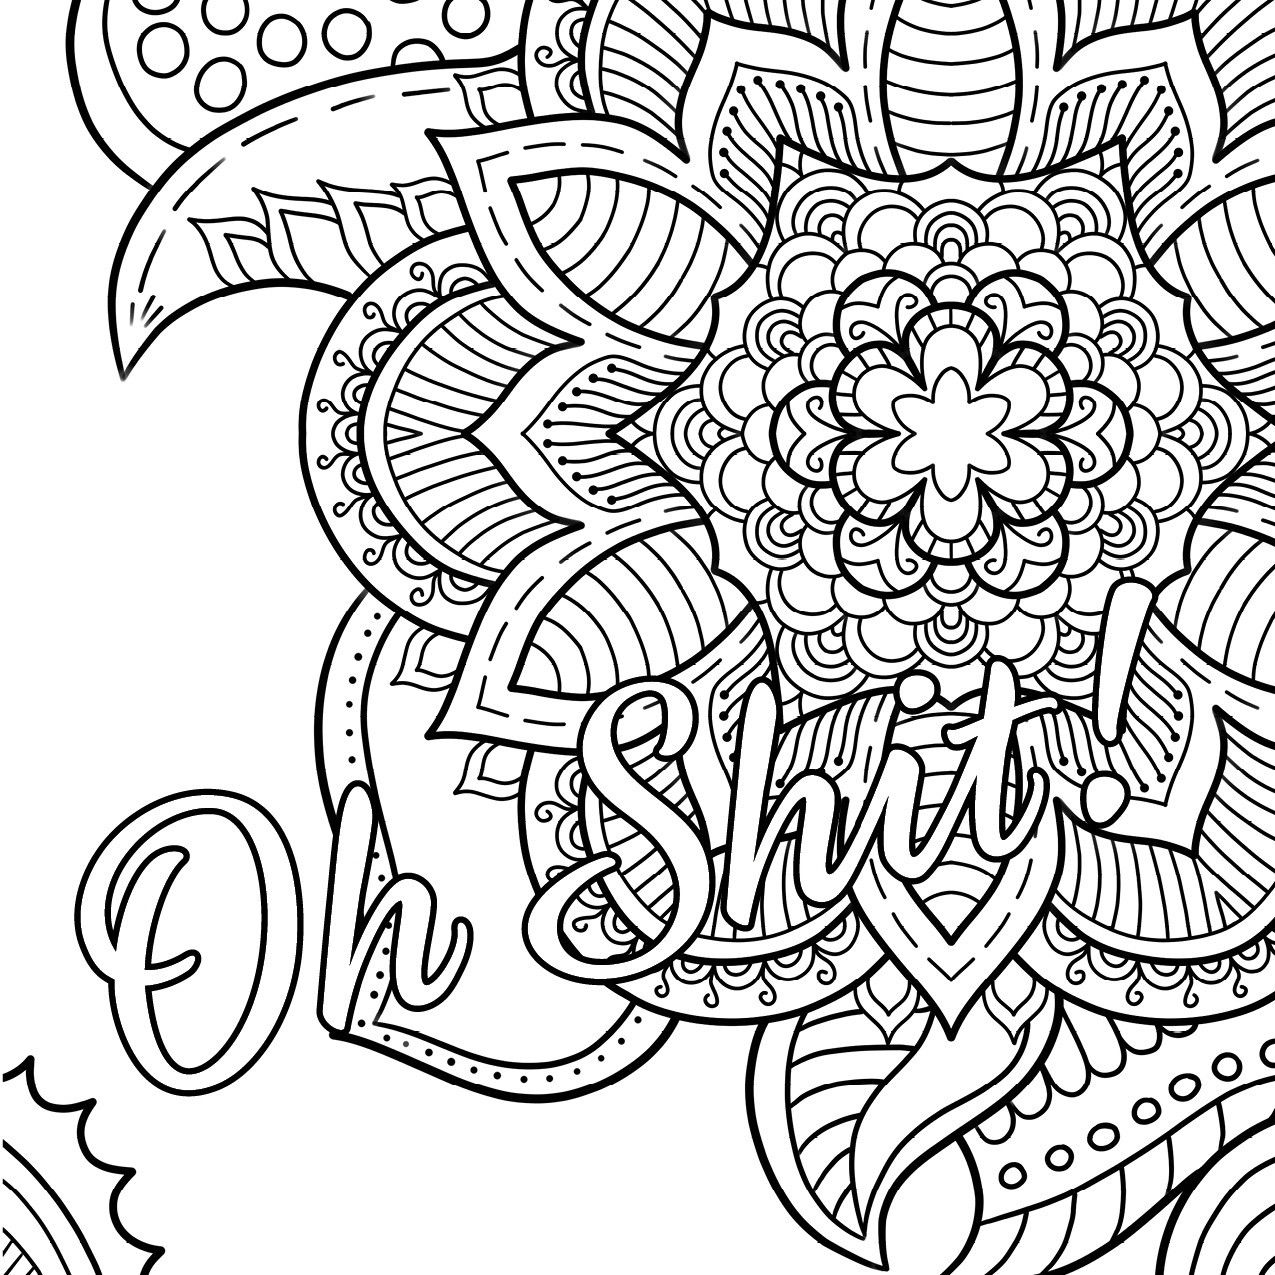 Word Coloring Pages For Adults